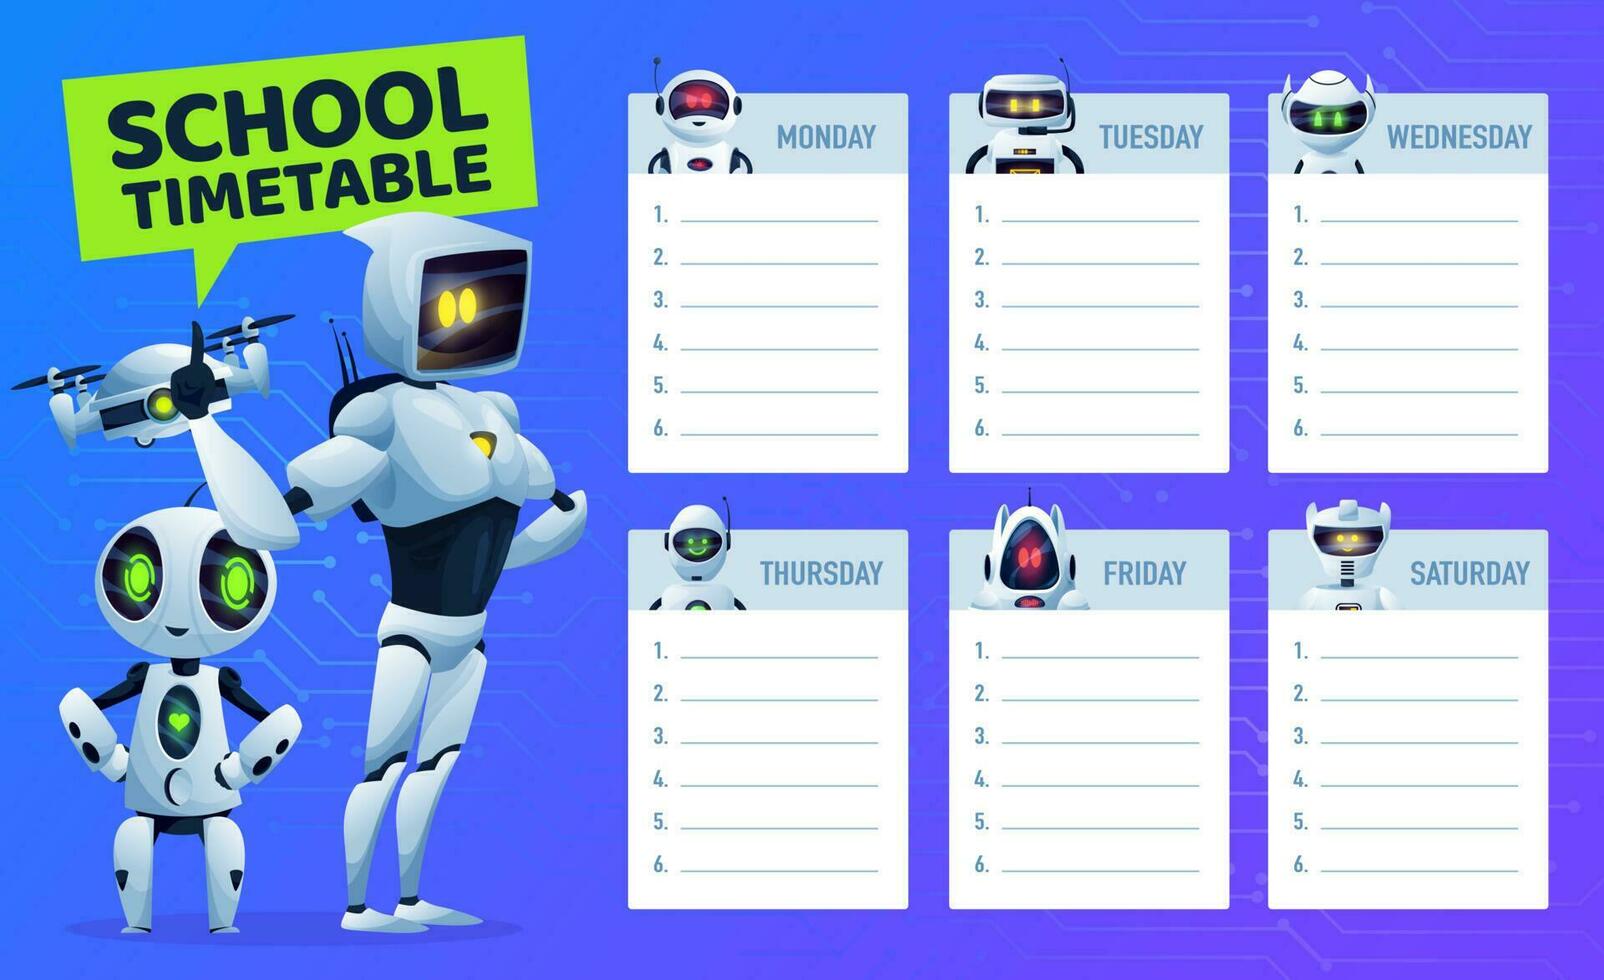 School timetable schedule with robots and drone vector